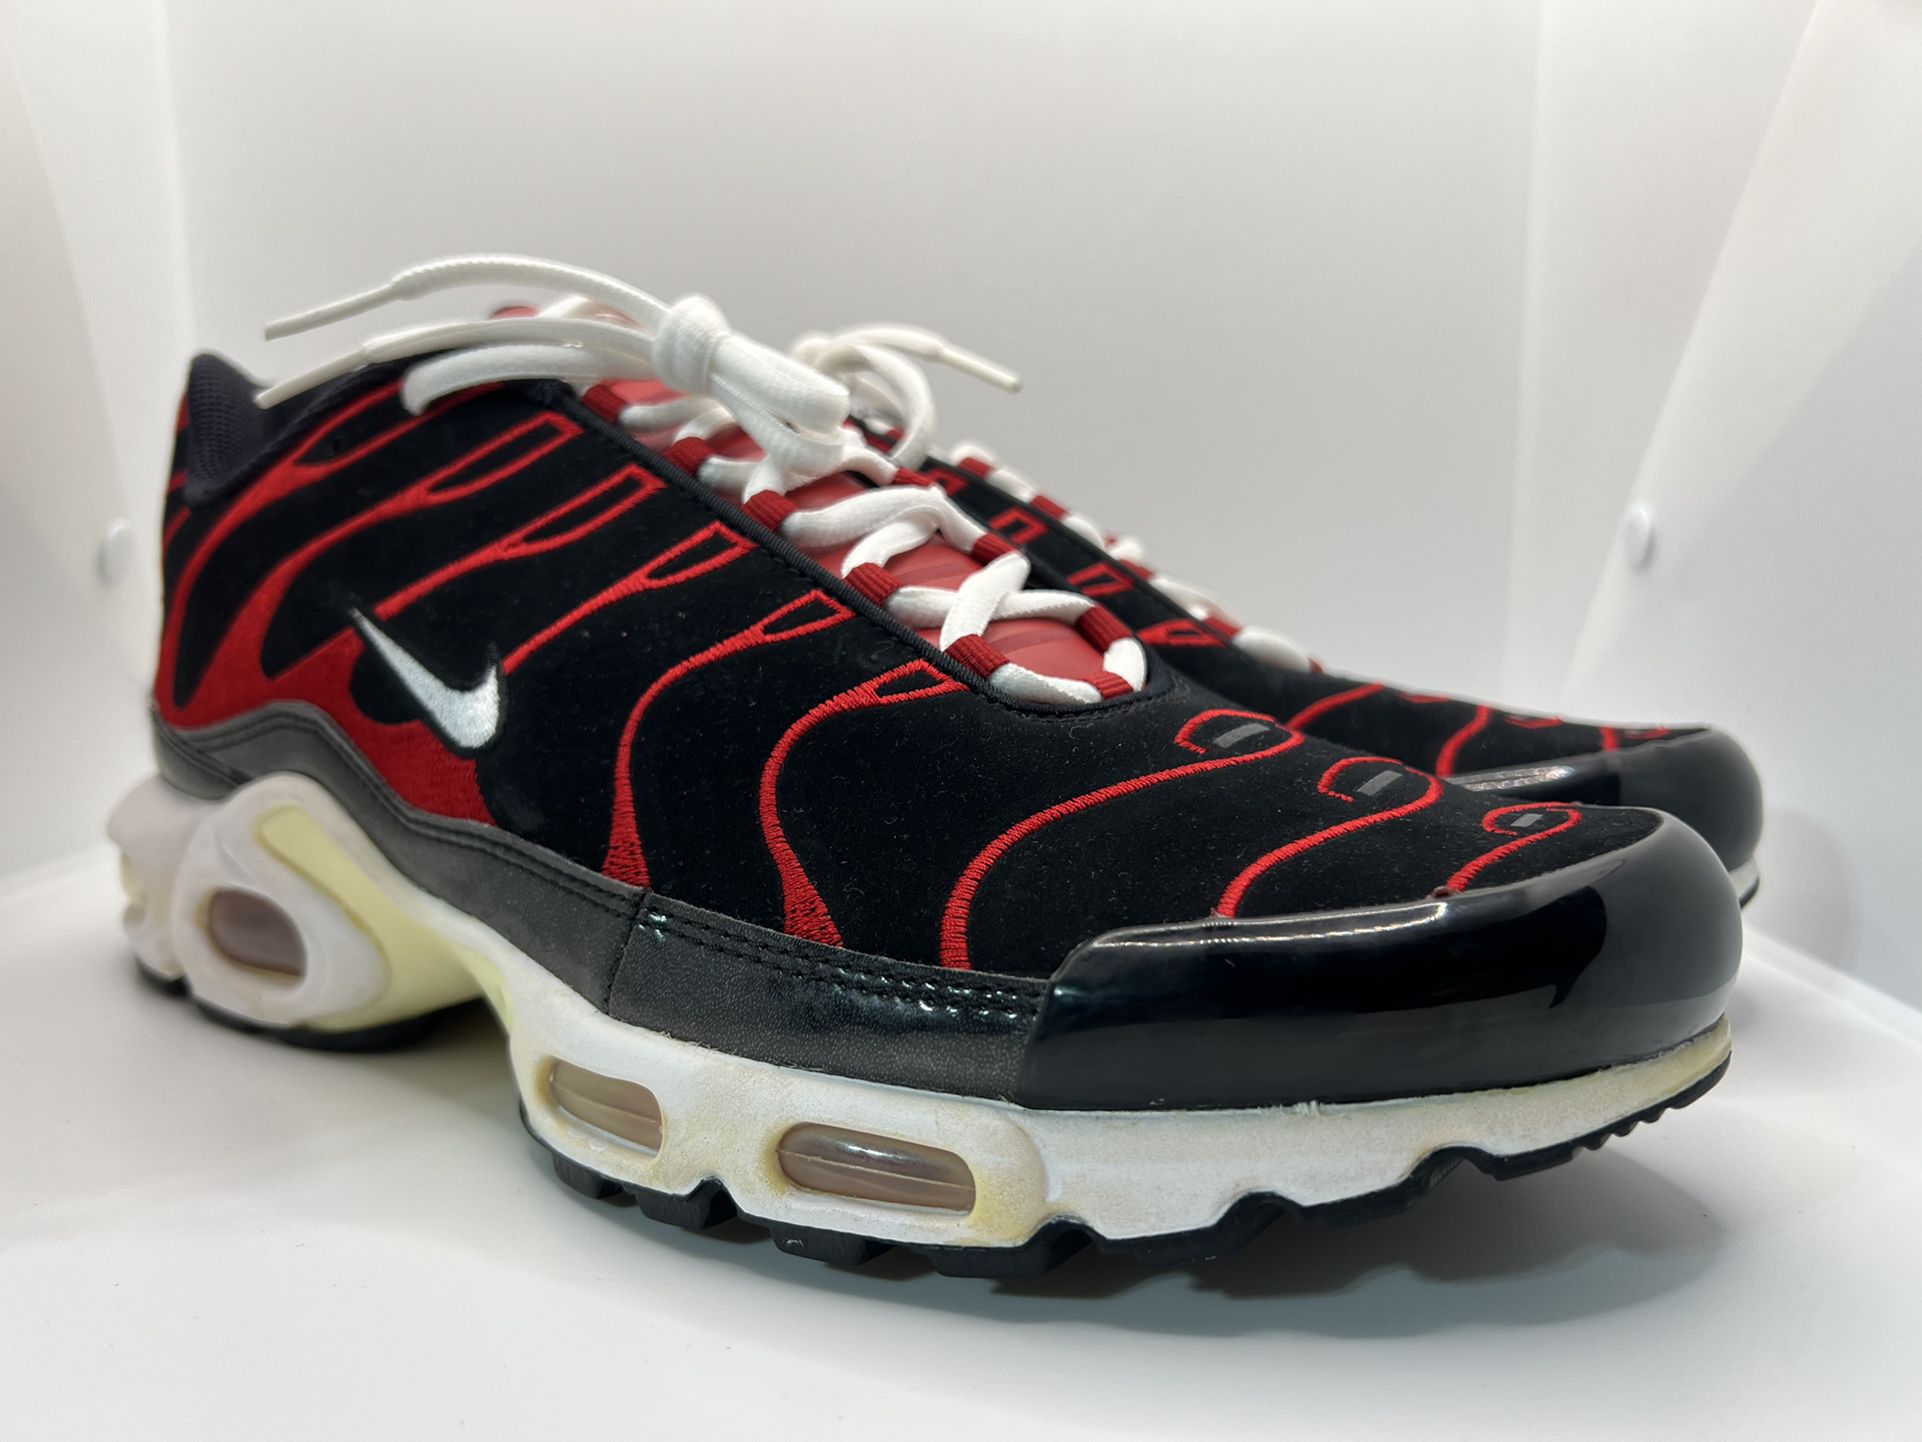 Nike Air Max Plus TN Black Red Mens Size 11.5 Rare Vintage Grail for Sale in Pico CA - OfferUp